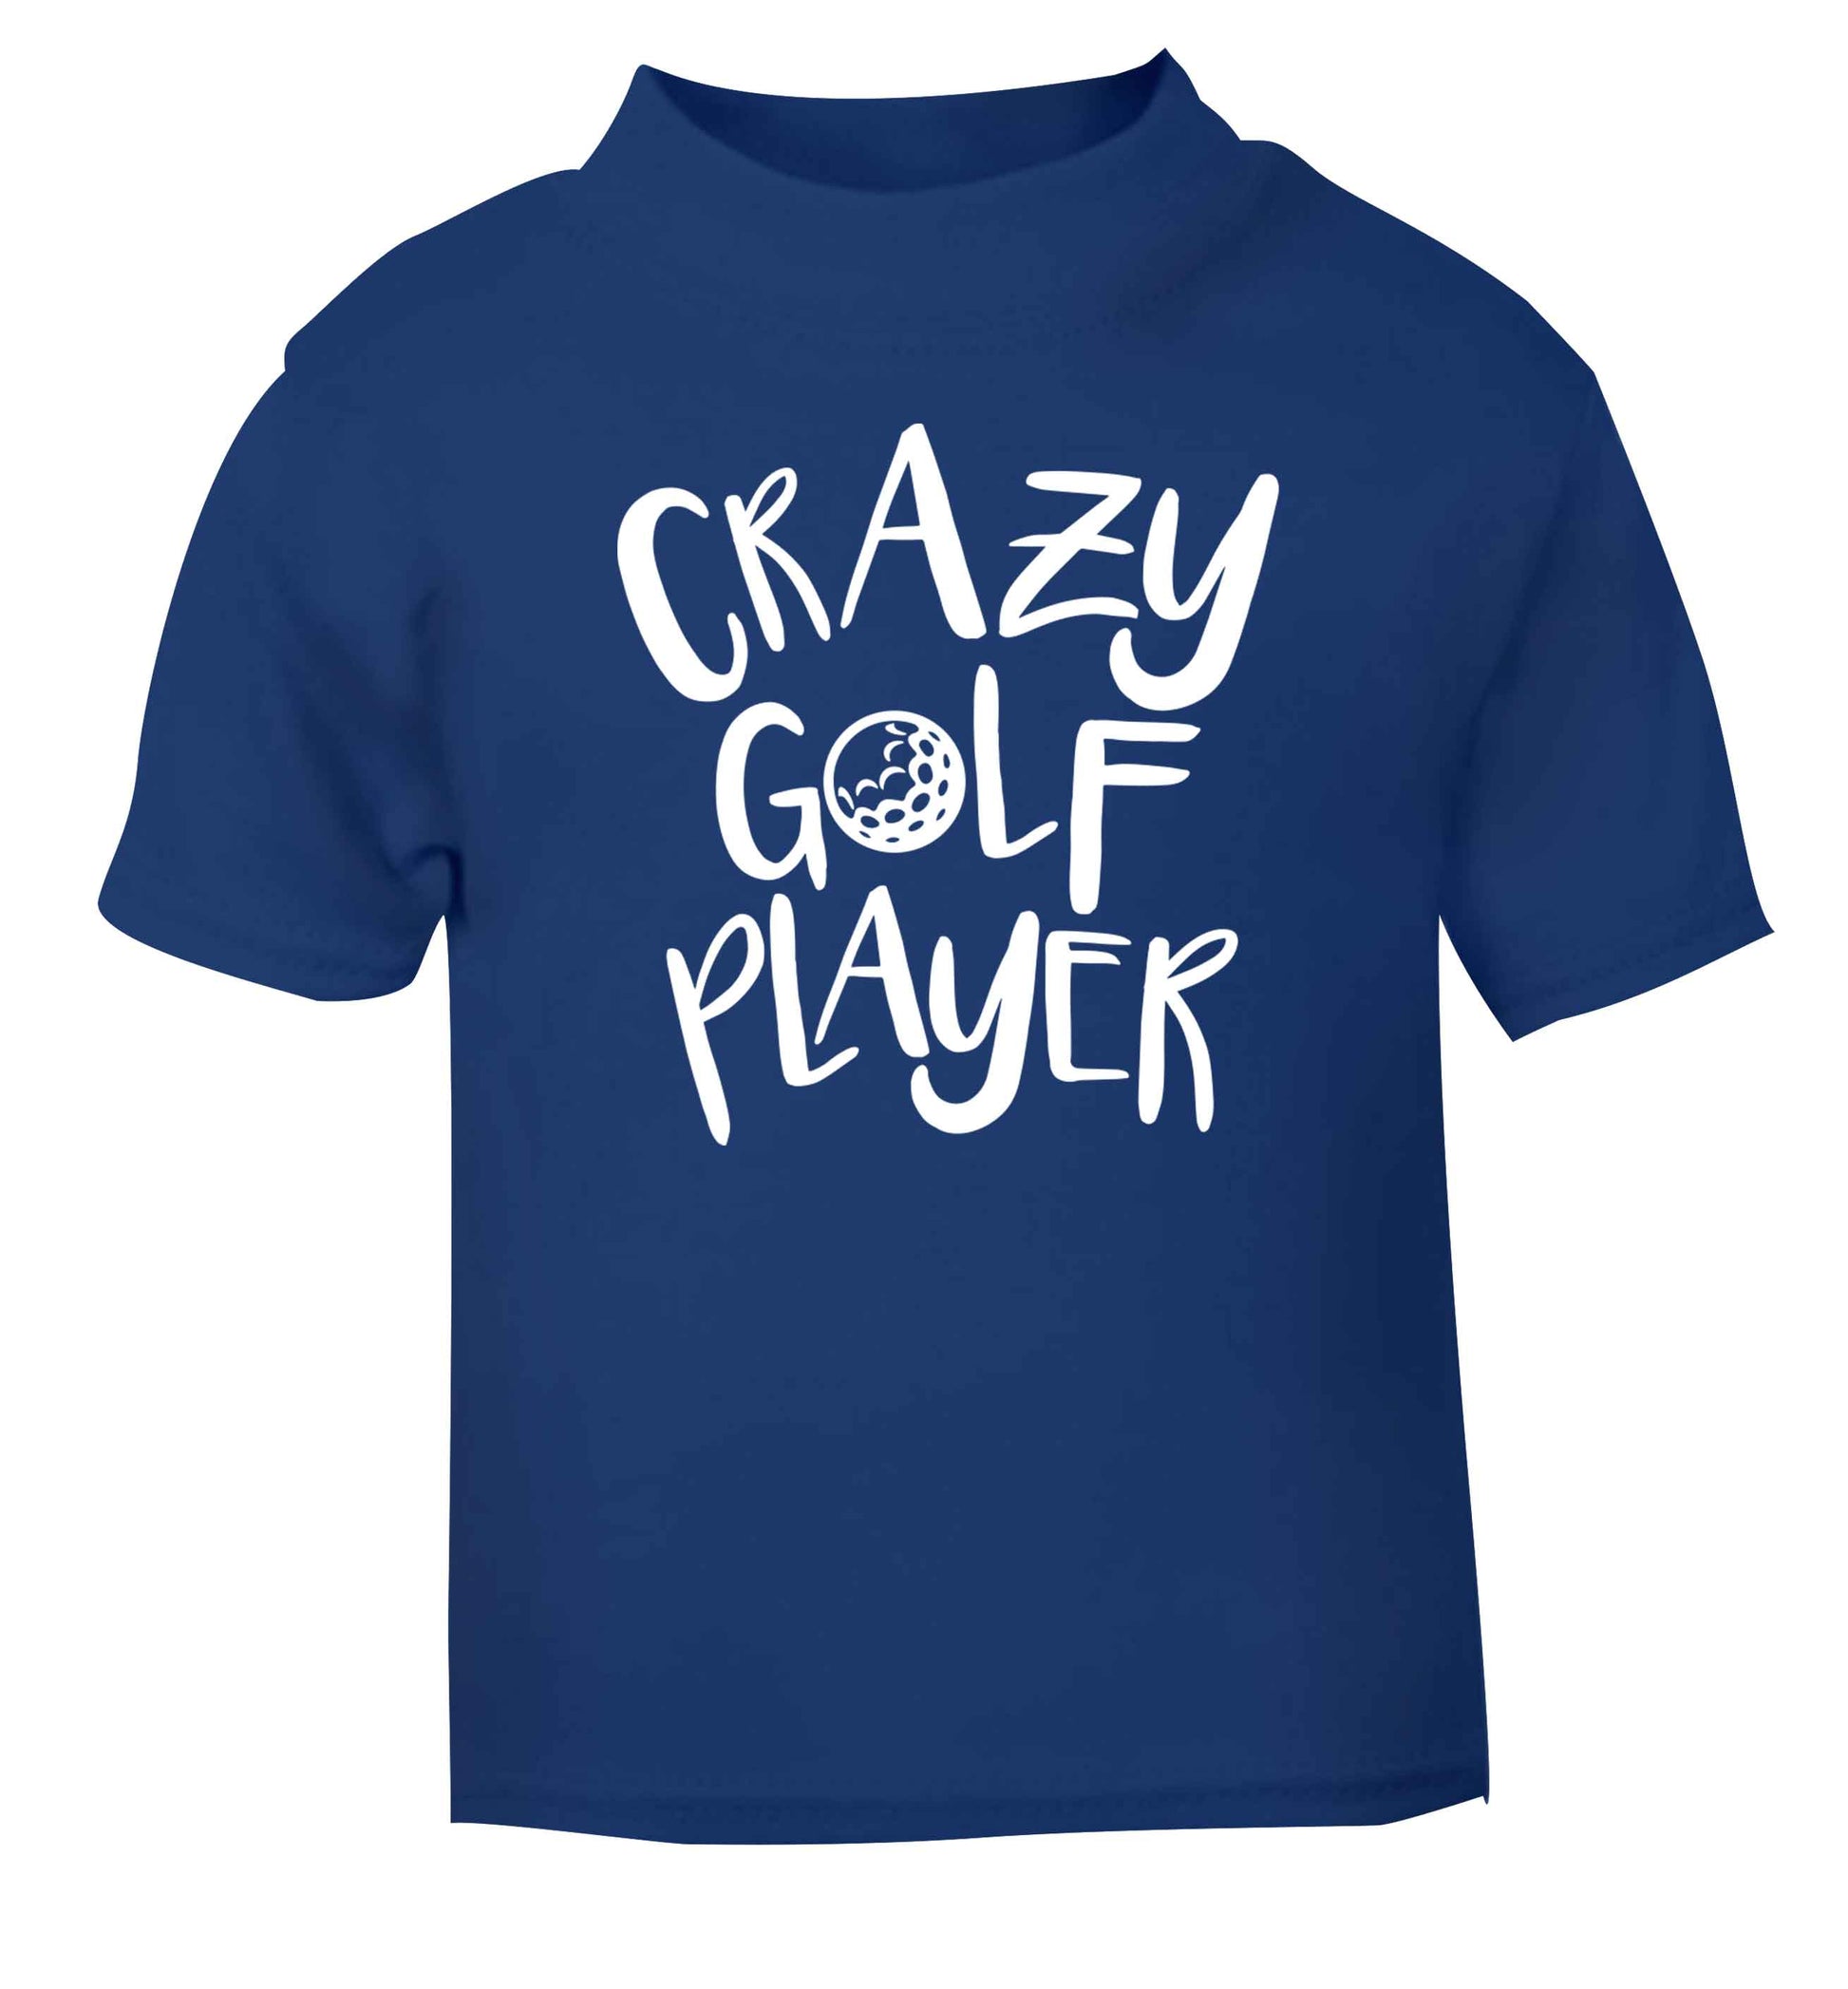 Crazy golf player blue Baby Toddler Tshirt 2 Years